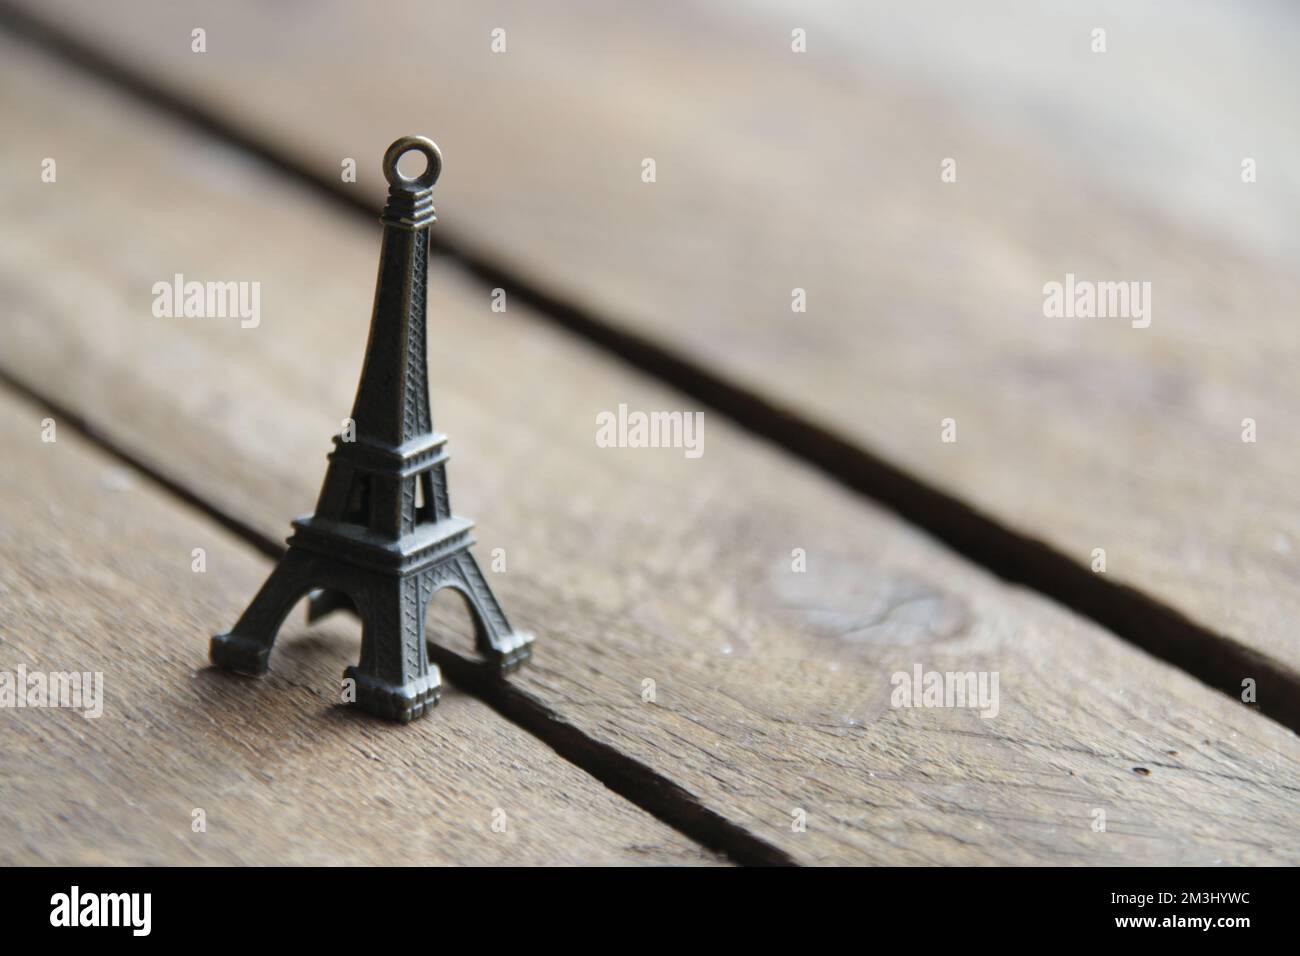 Tour eiffel miniature hi-res stock photography and images - Alamy